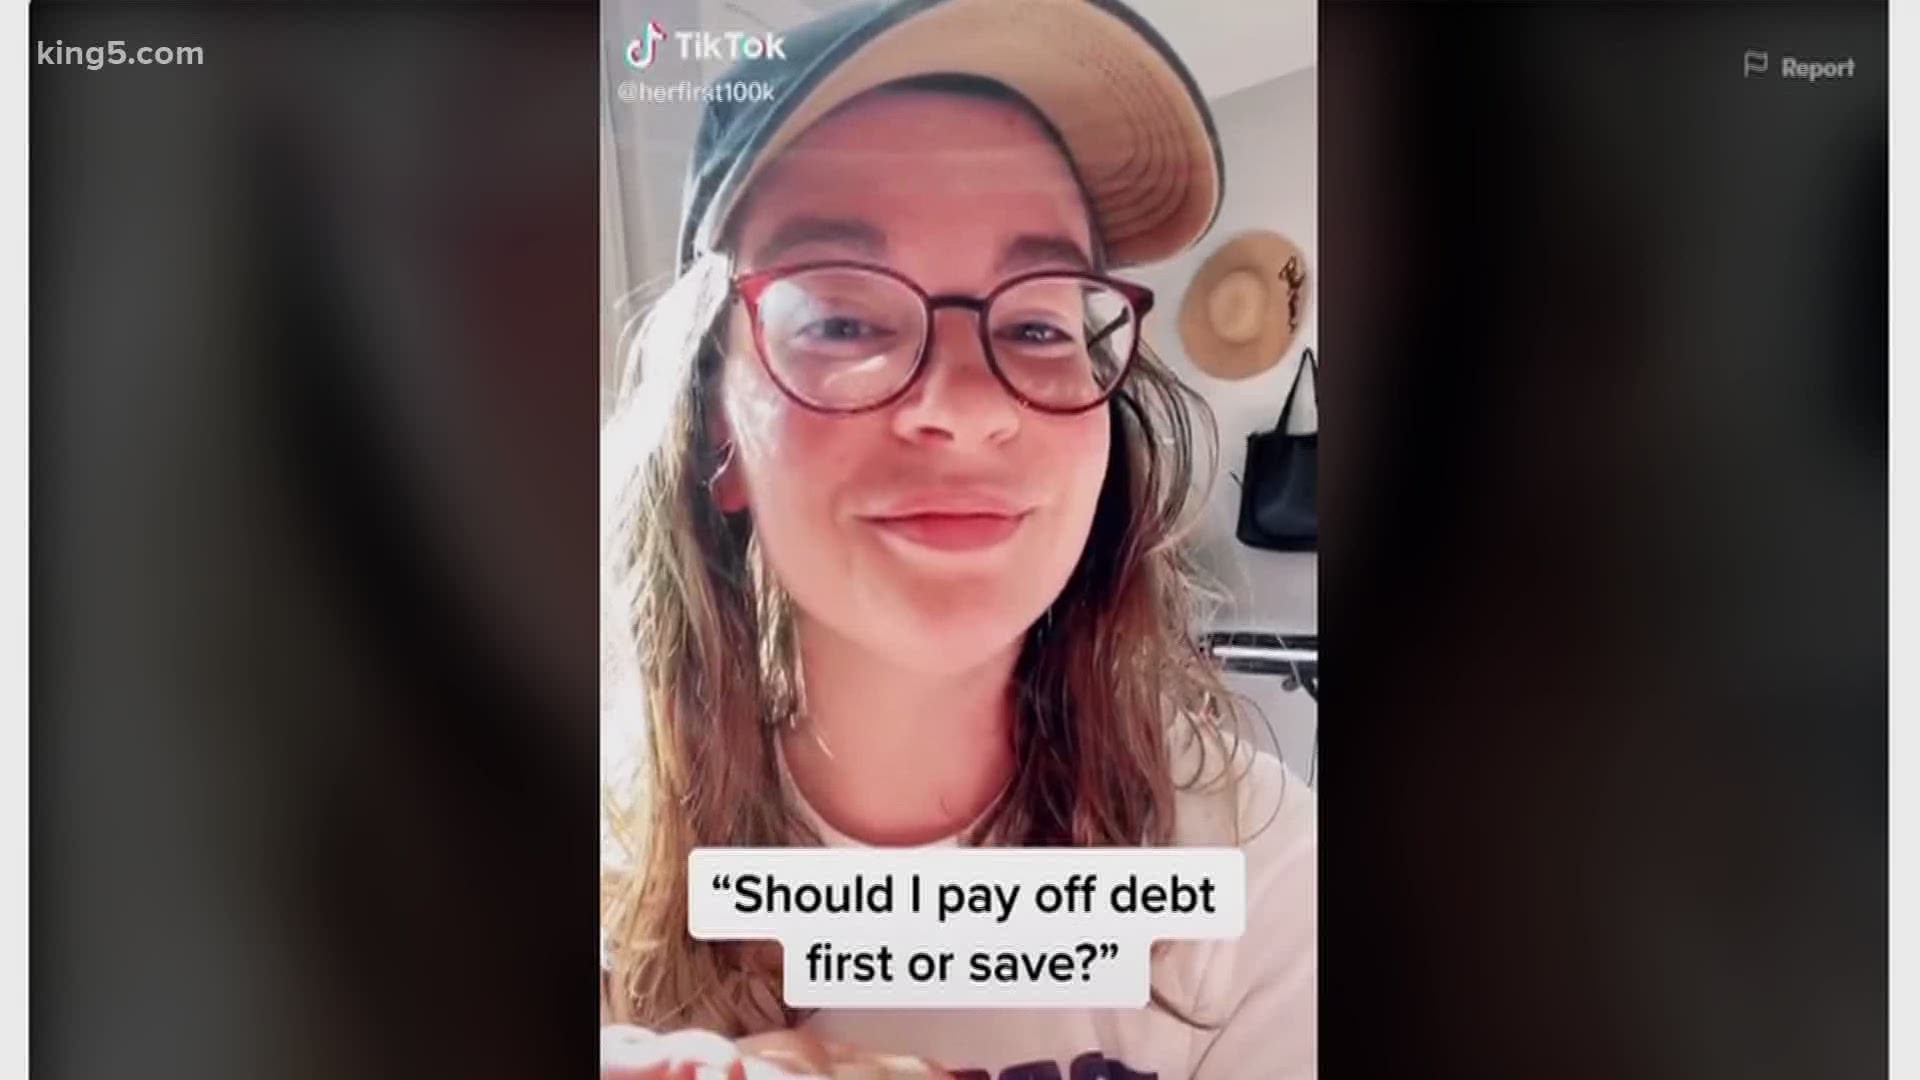 More Generation Z and younger Millennials are tackling personal finance and systemic inequalities around money, says Tori Dunlap of Her First $100k.